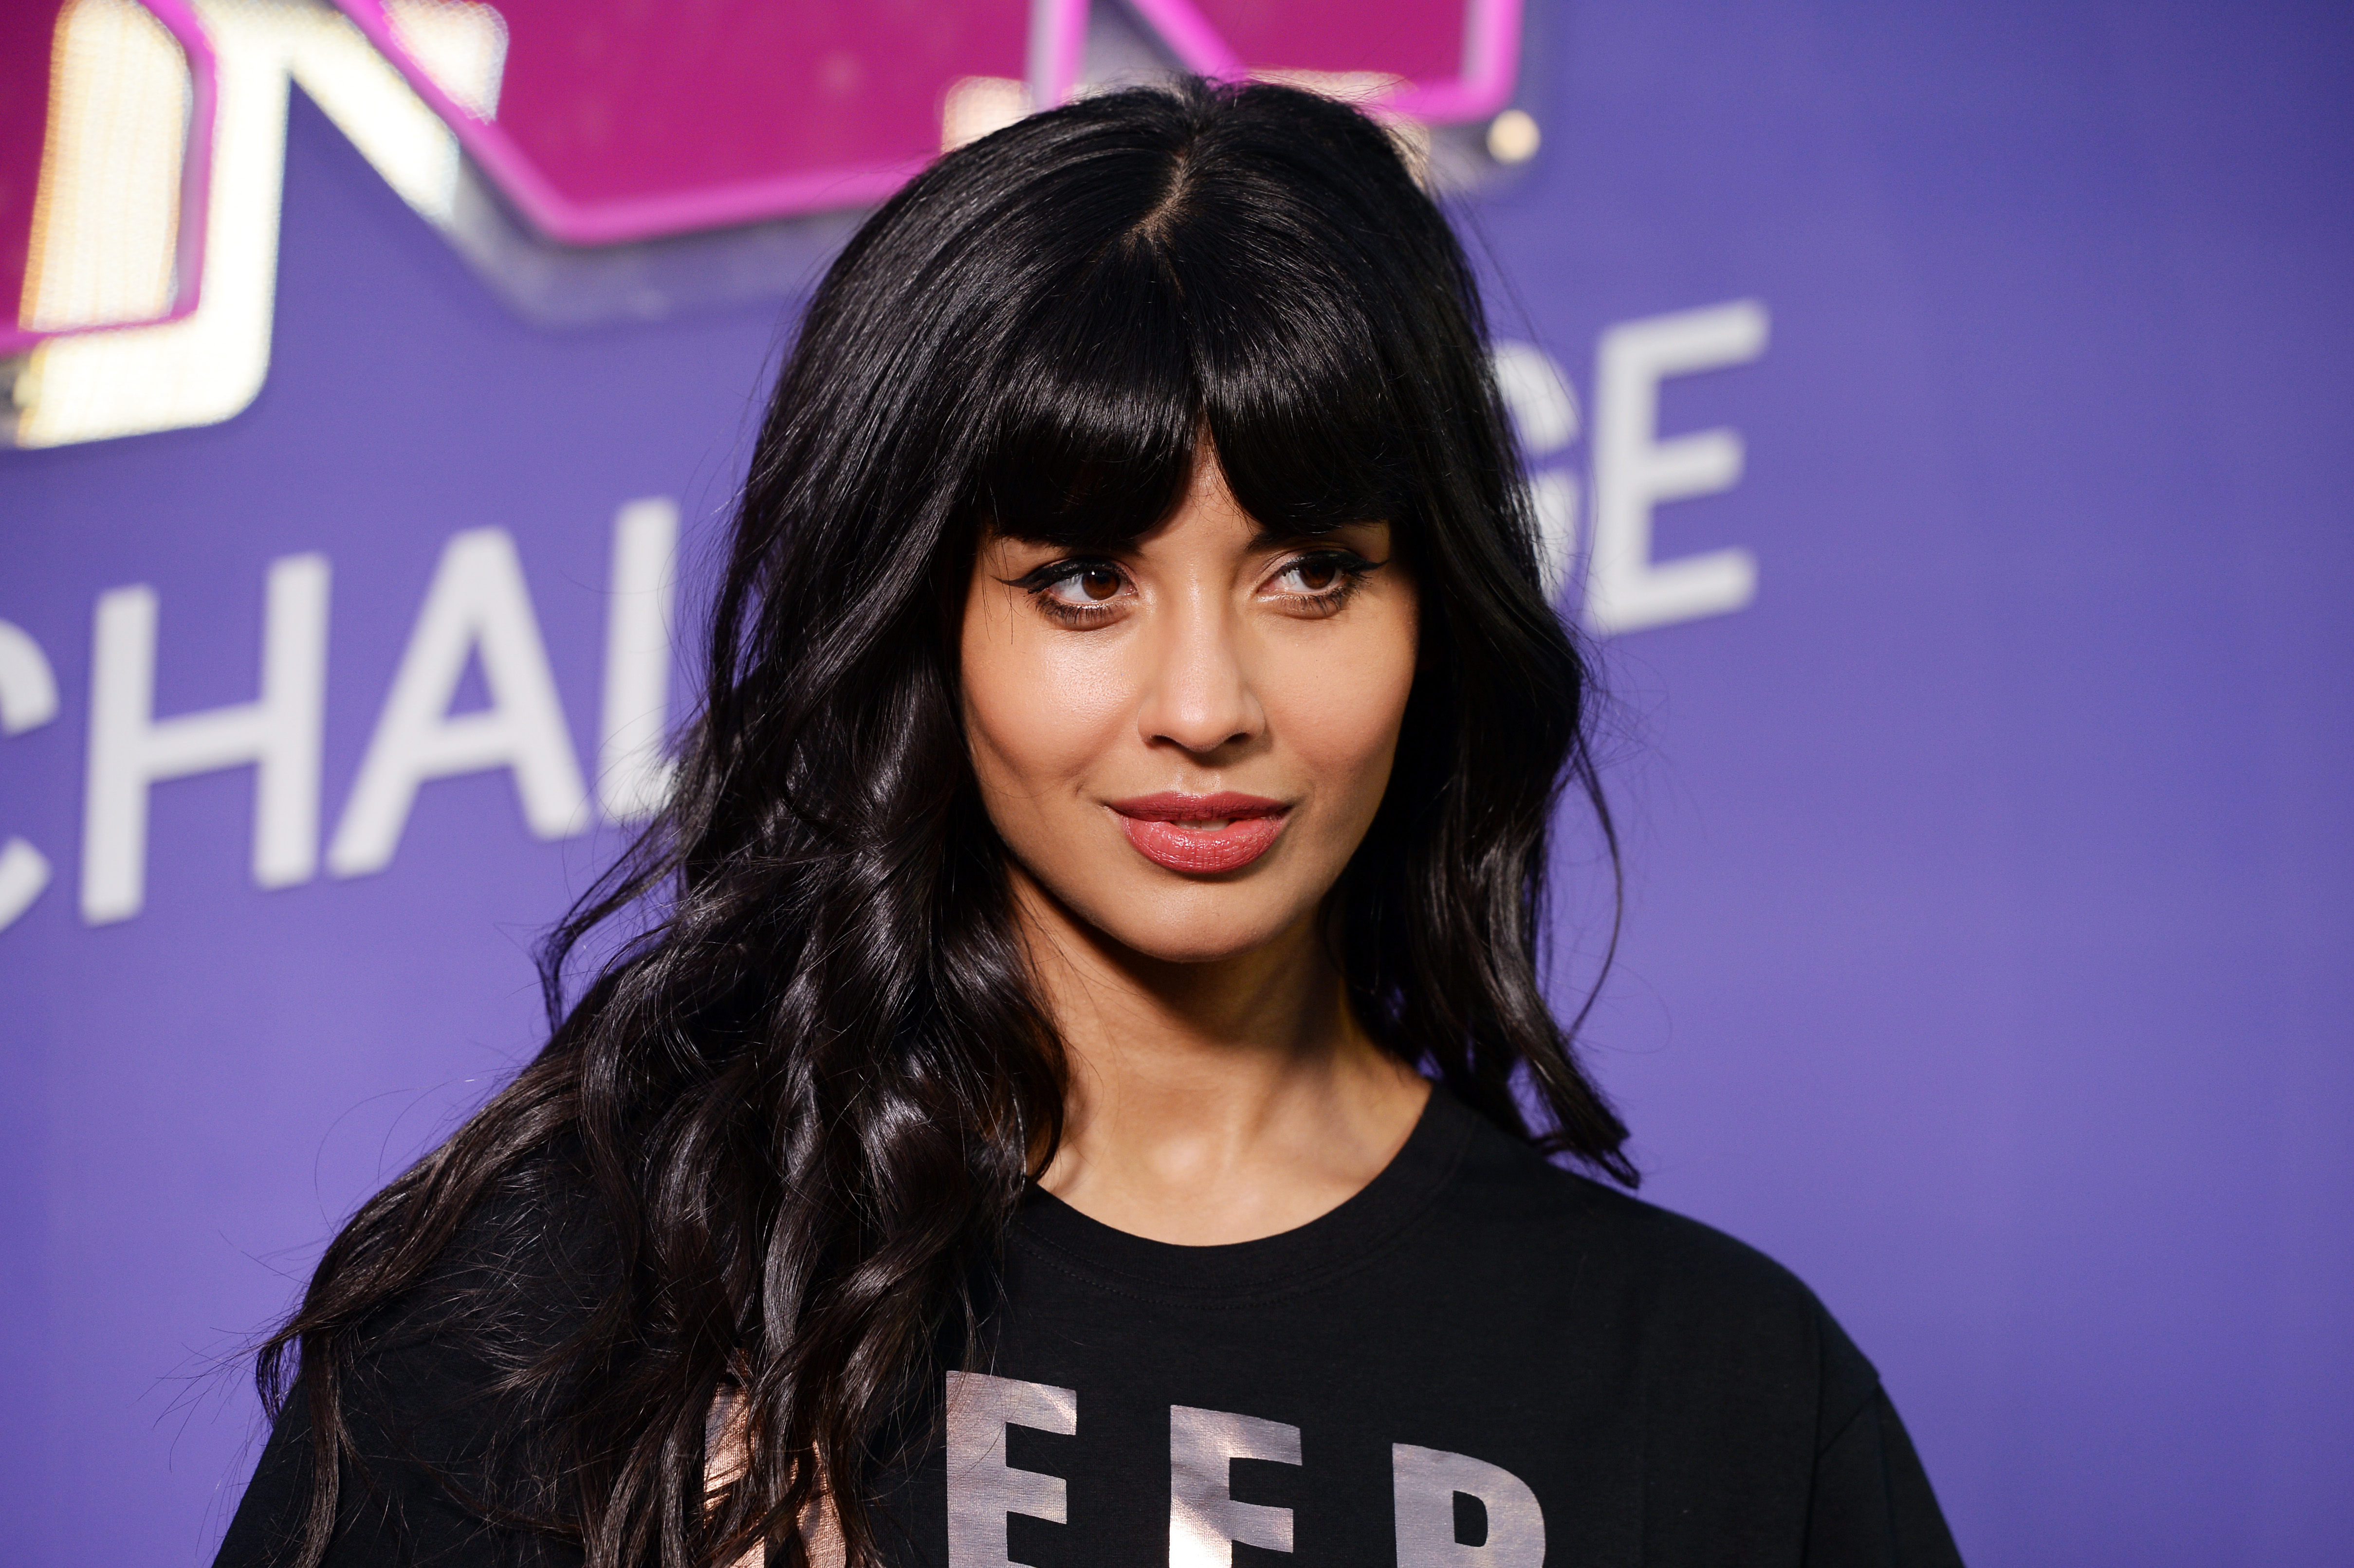 Jameela Jamil Cites ‘Privilege’ As Her Secret to Clear Skin & Some Twitter Users Are Annoyed